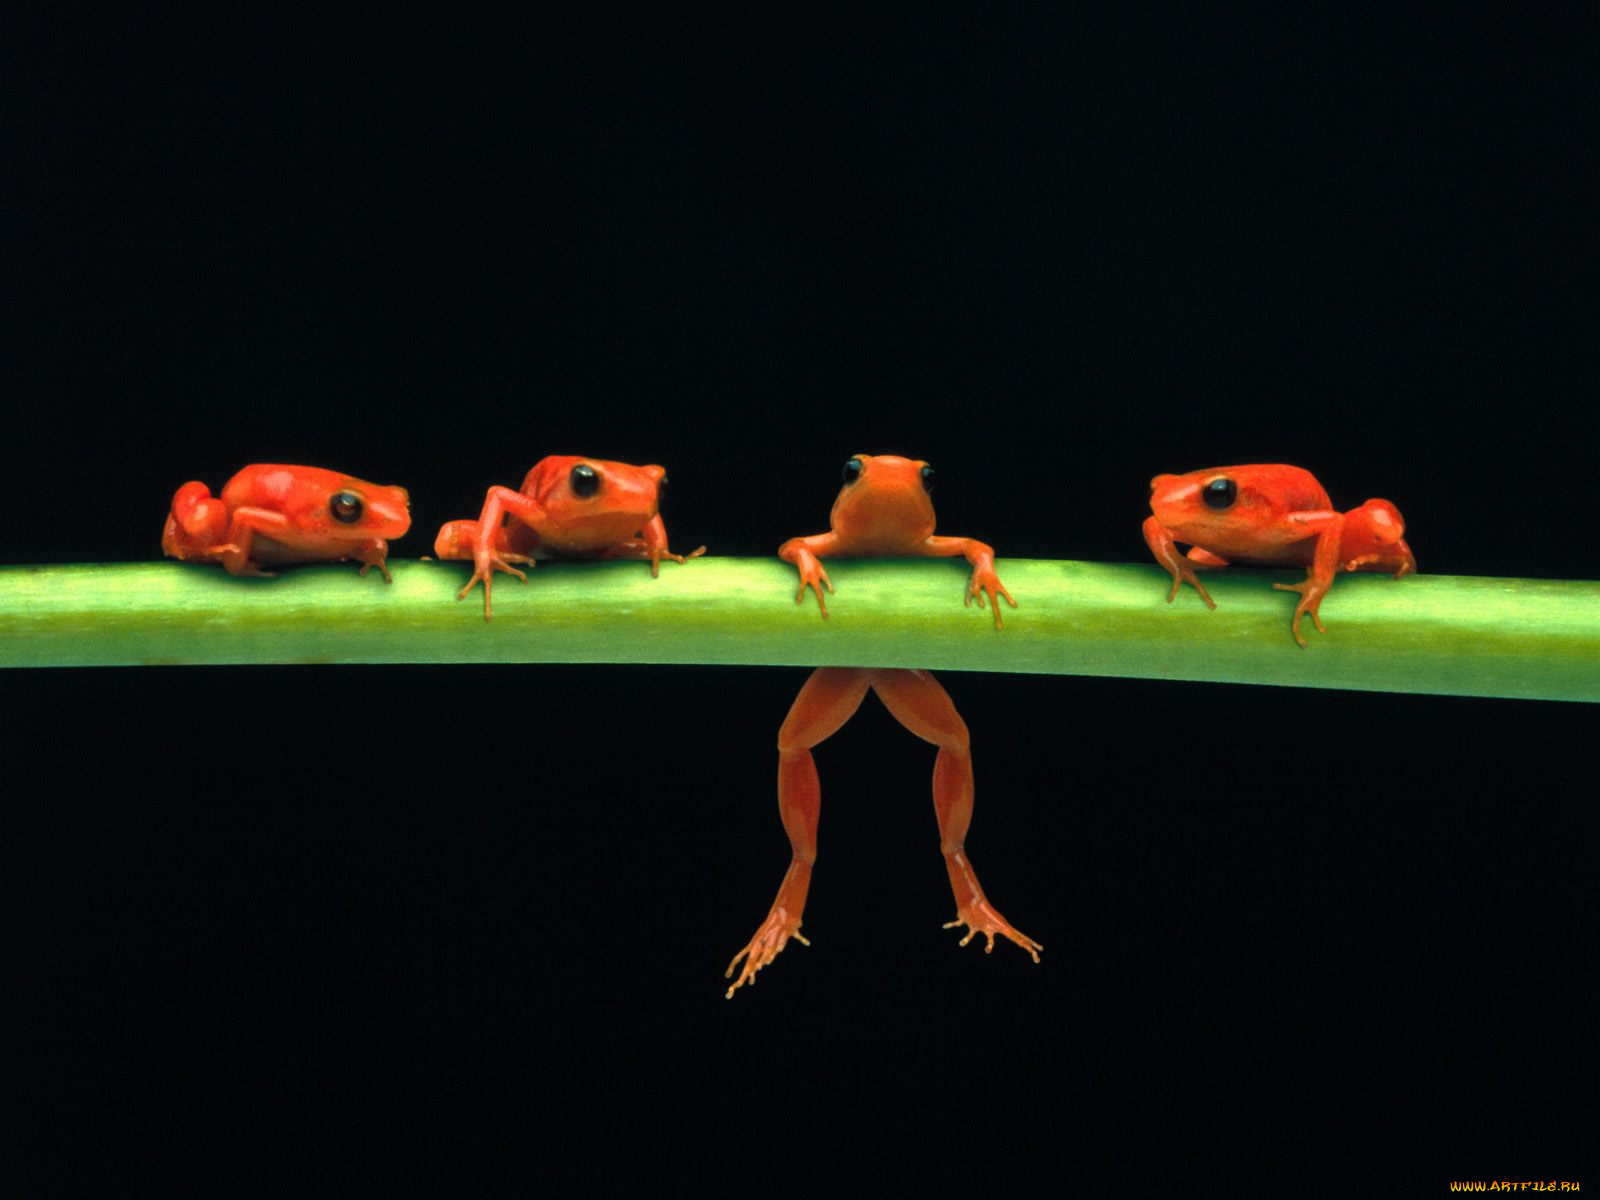 hang, in, there, red, tree, frogs, животные, лягушки